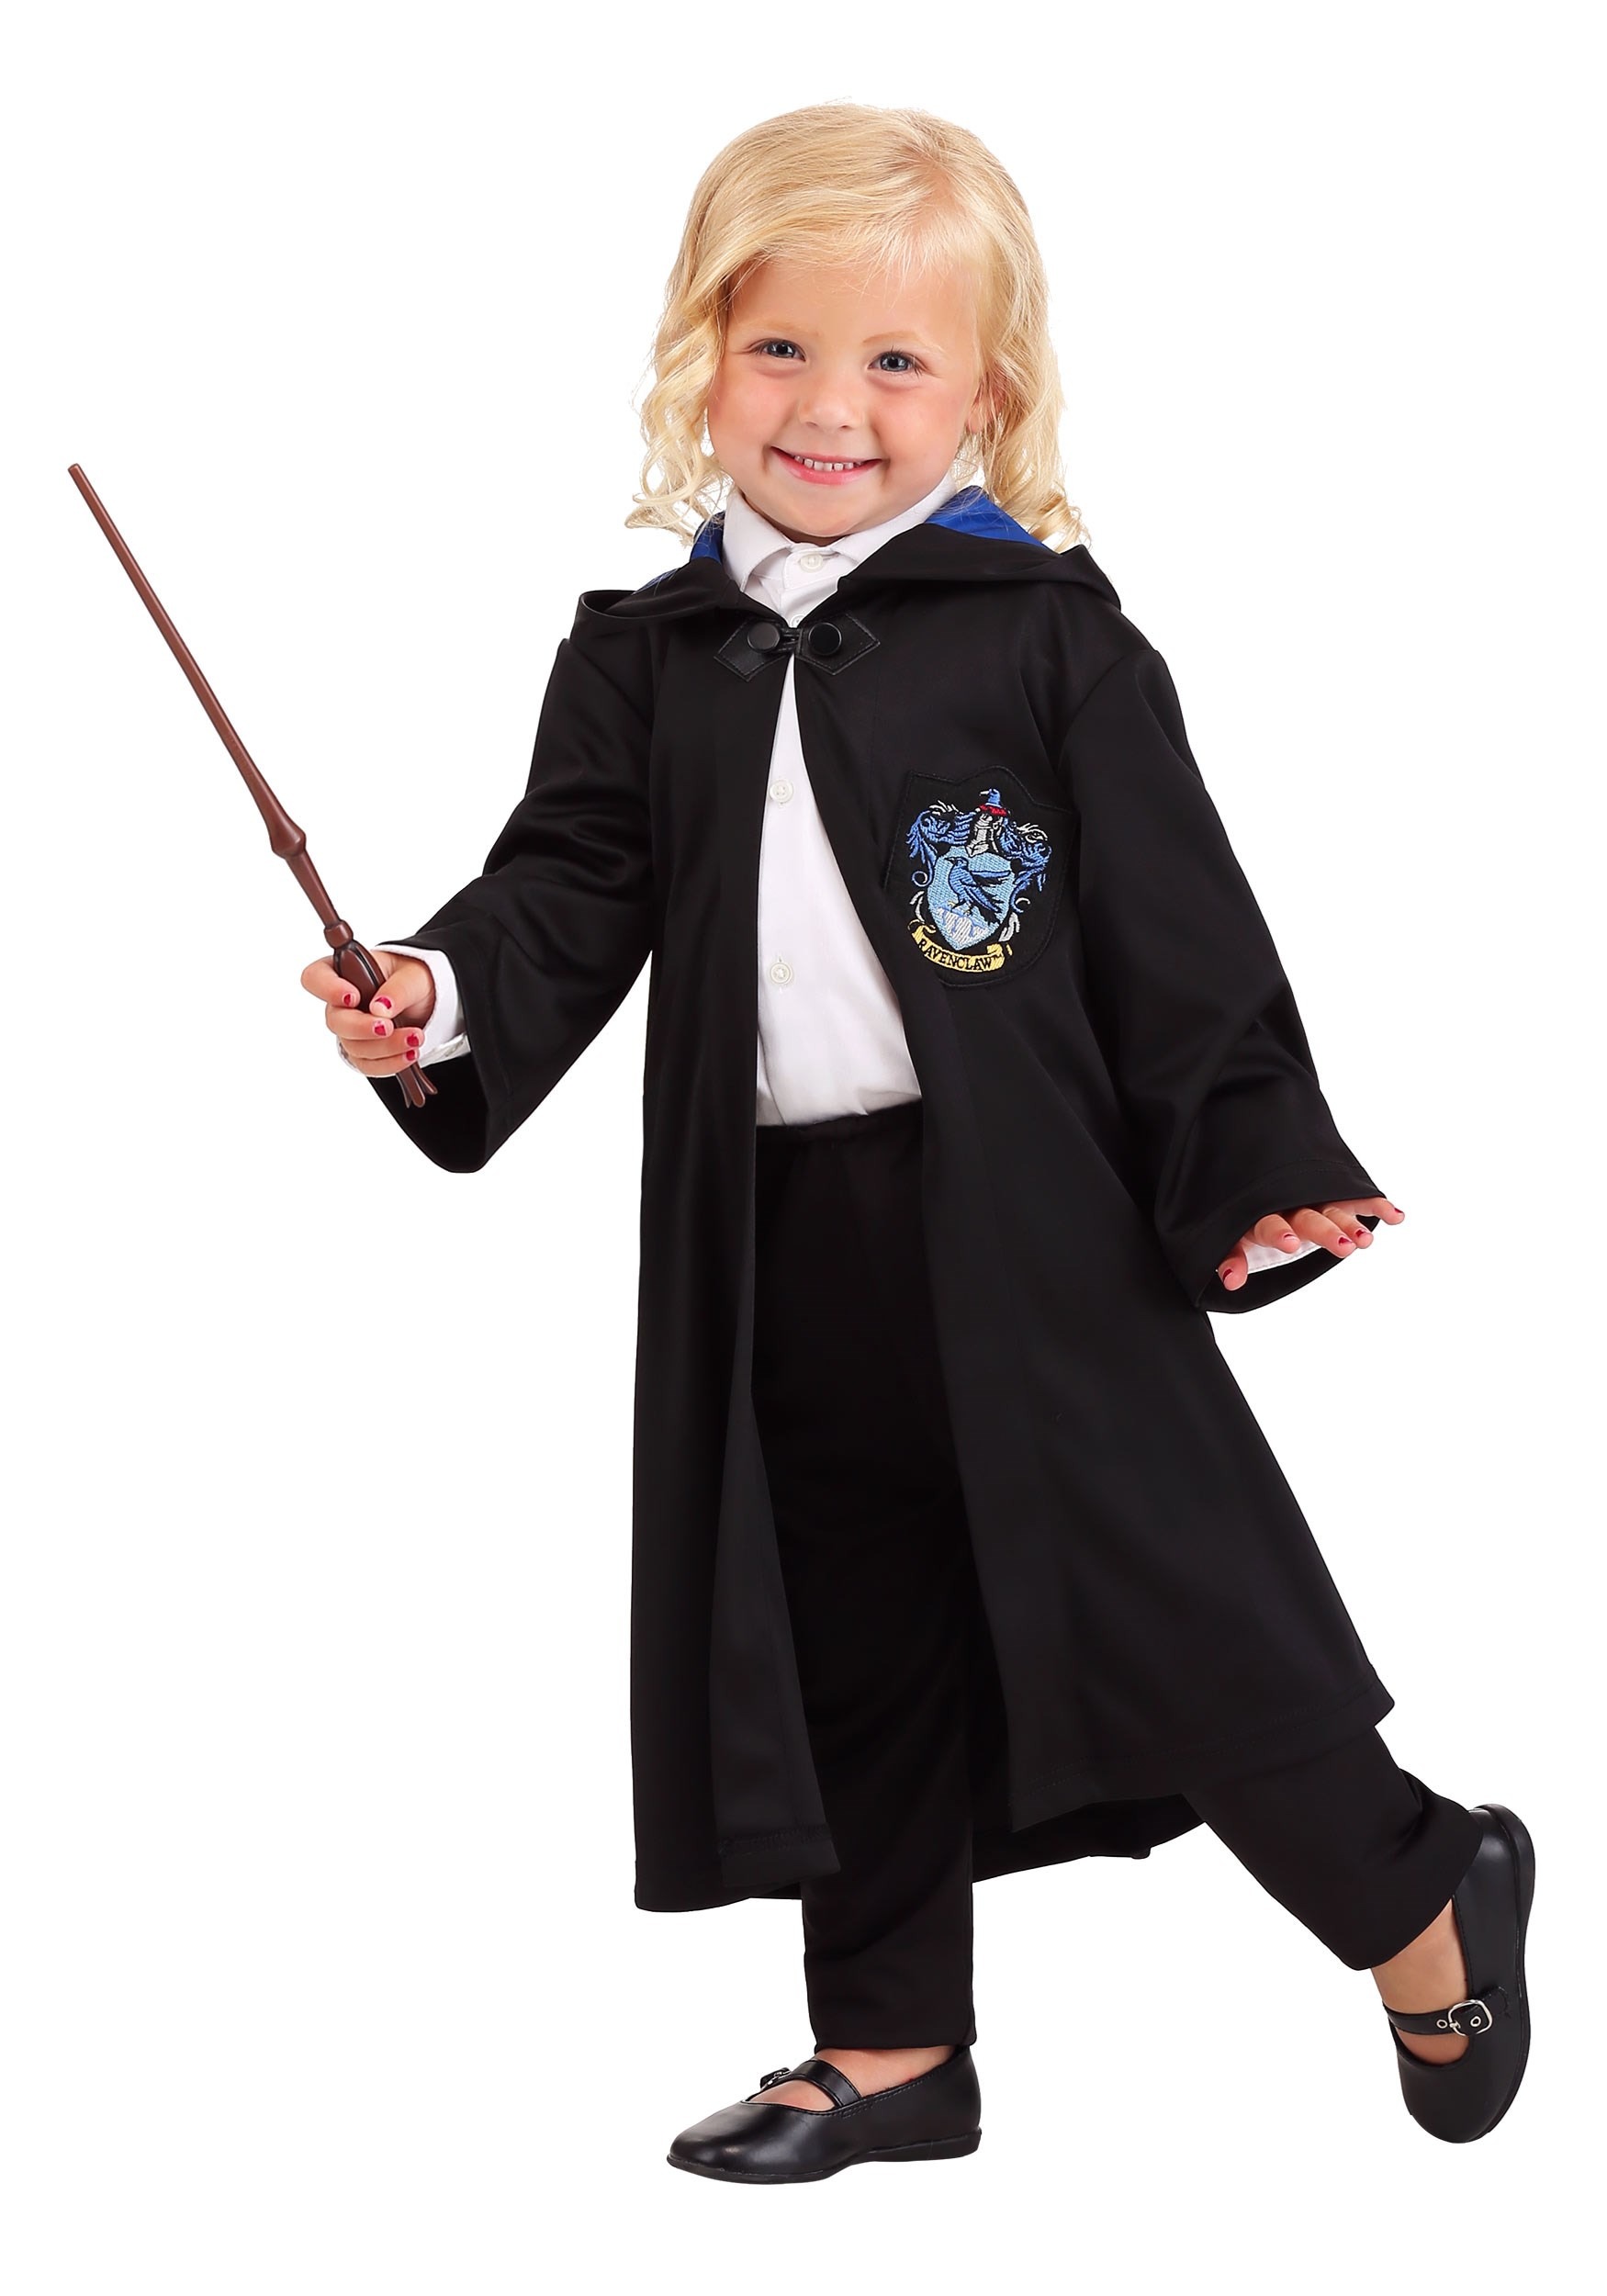 Photos - Fancy Dress Potter Jerry Leigh Harry  Toddlers Ravenclaw Costume Robe Black/Blue FU 